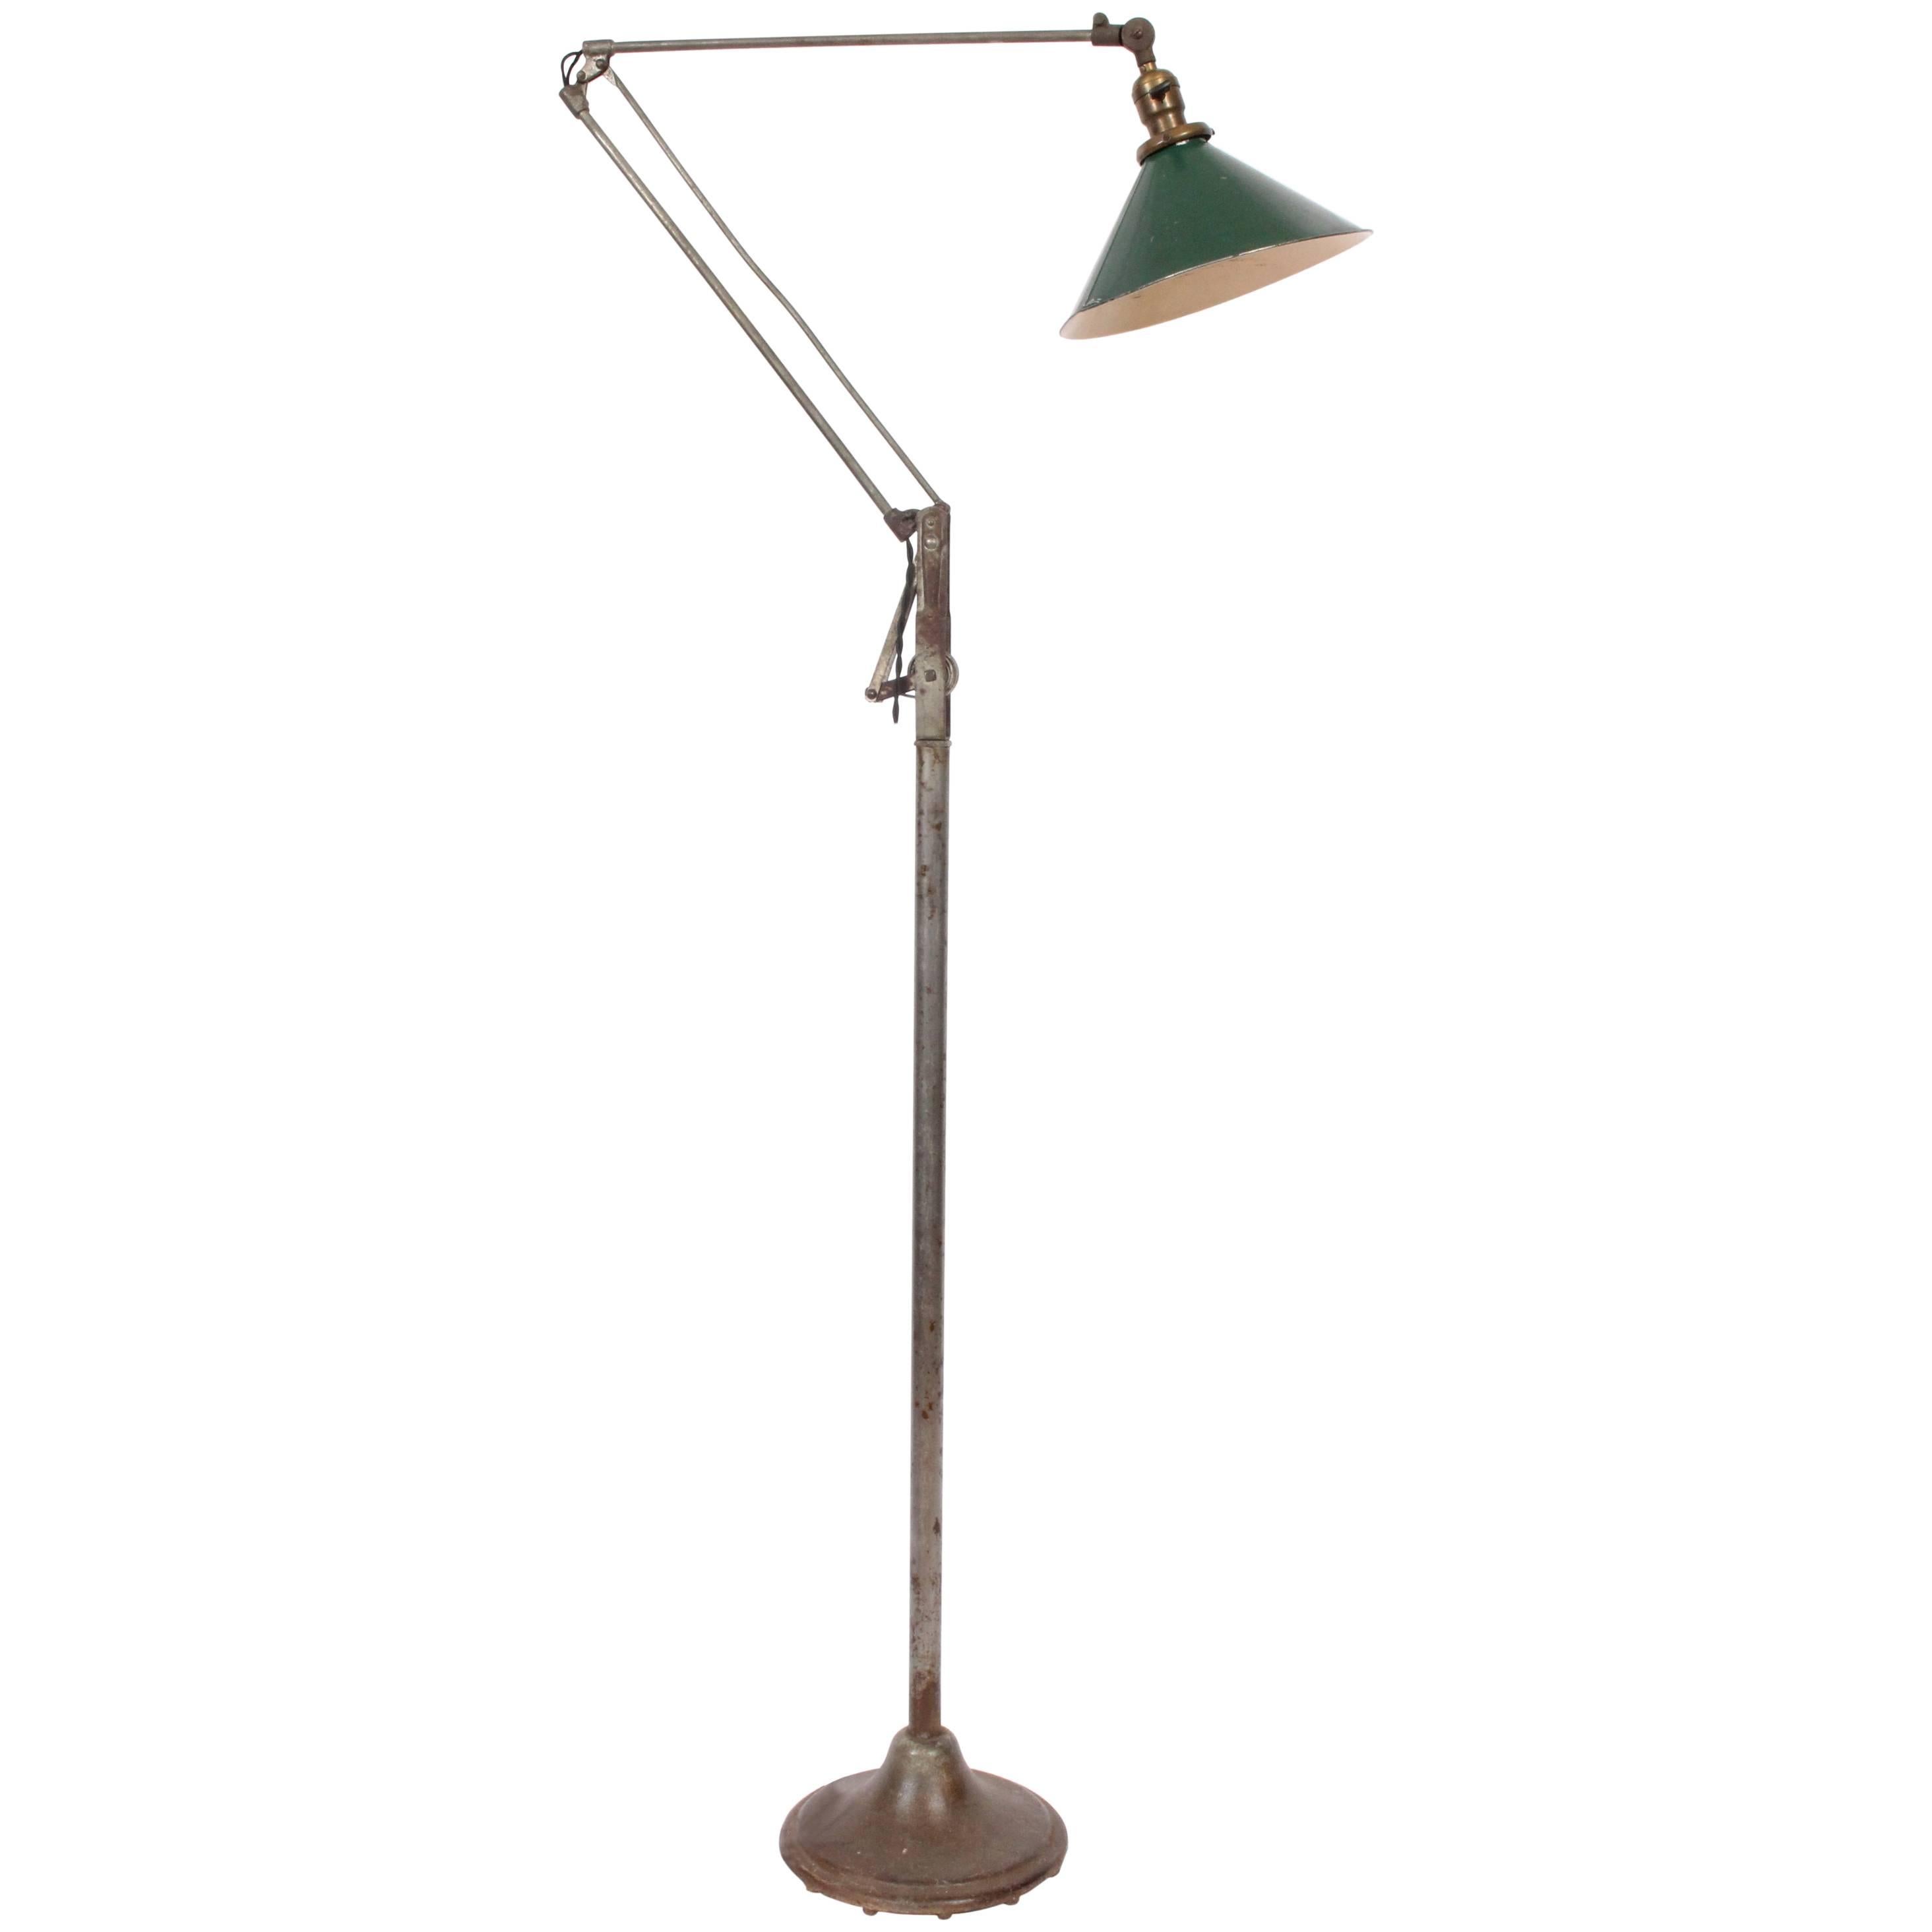 Dazor Iron Works Articulating Iron Floor Lamp with Green Shade, circa 1920